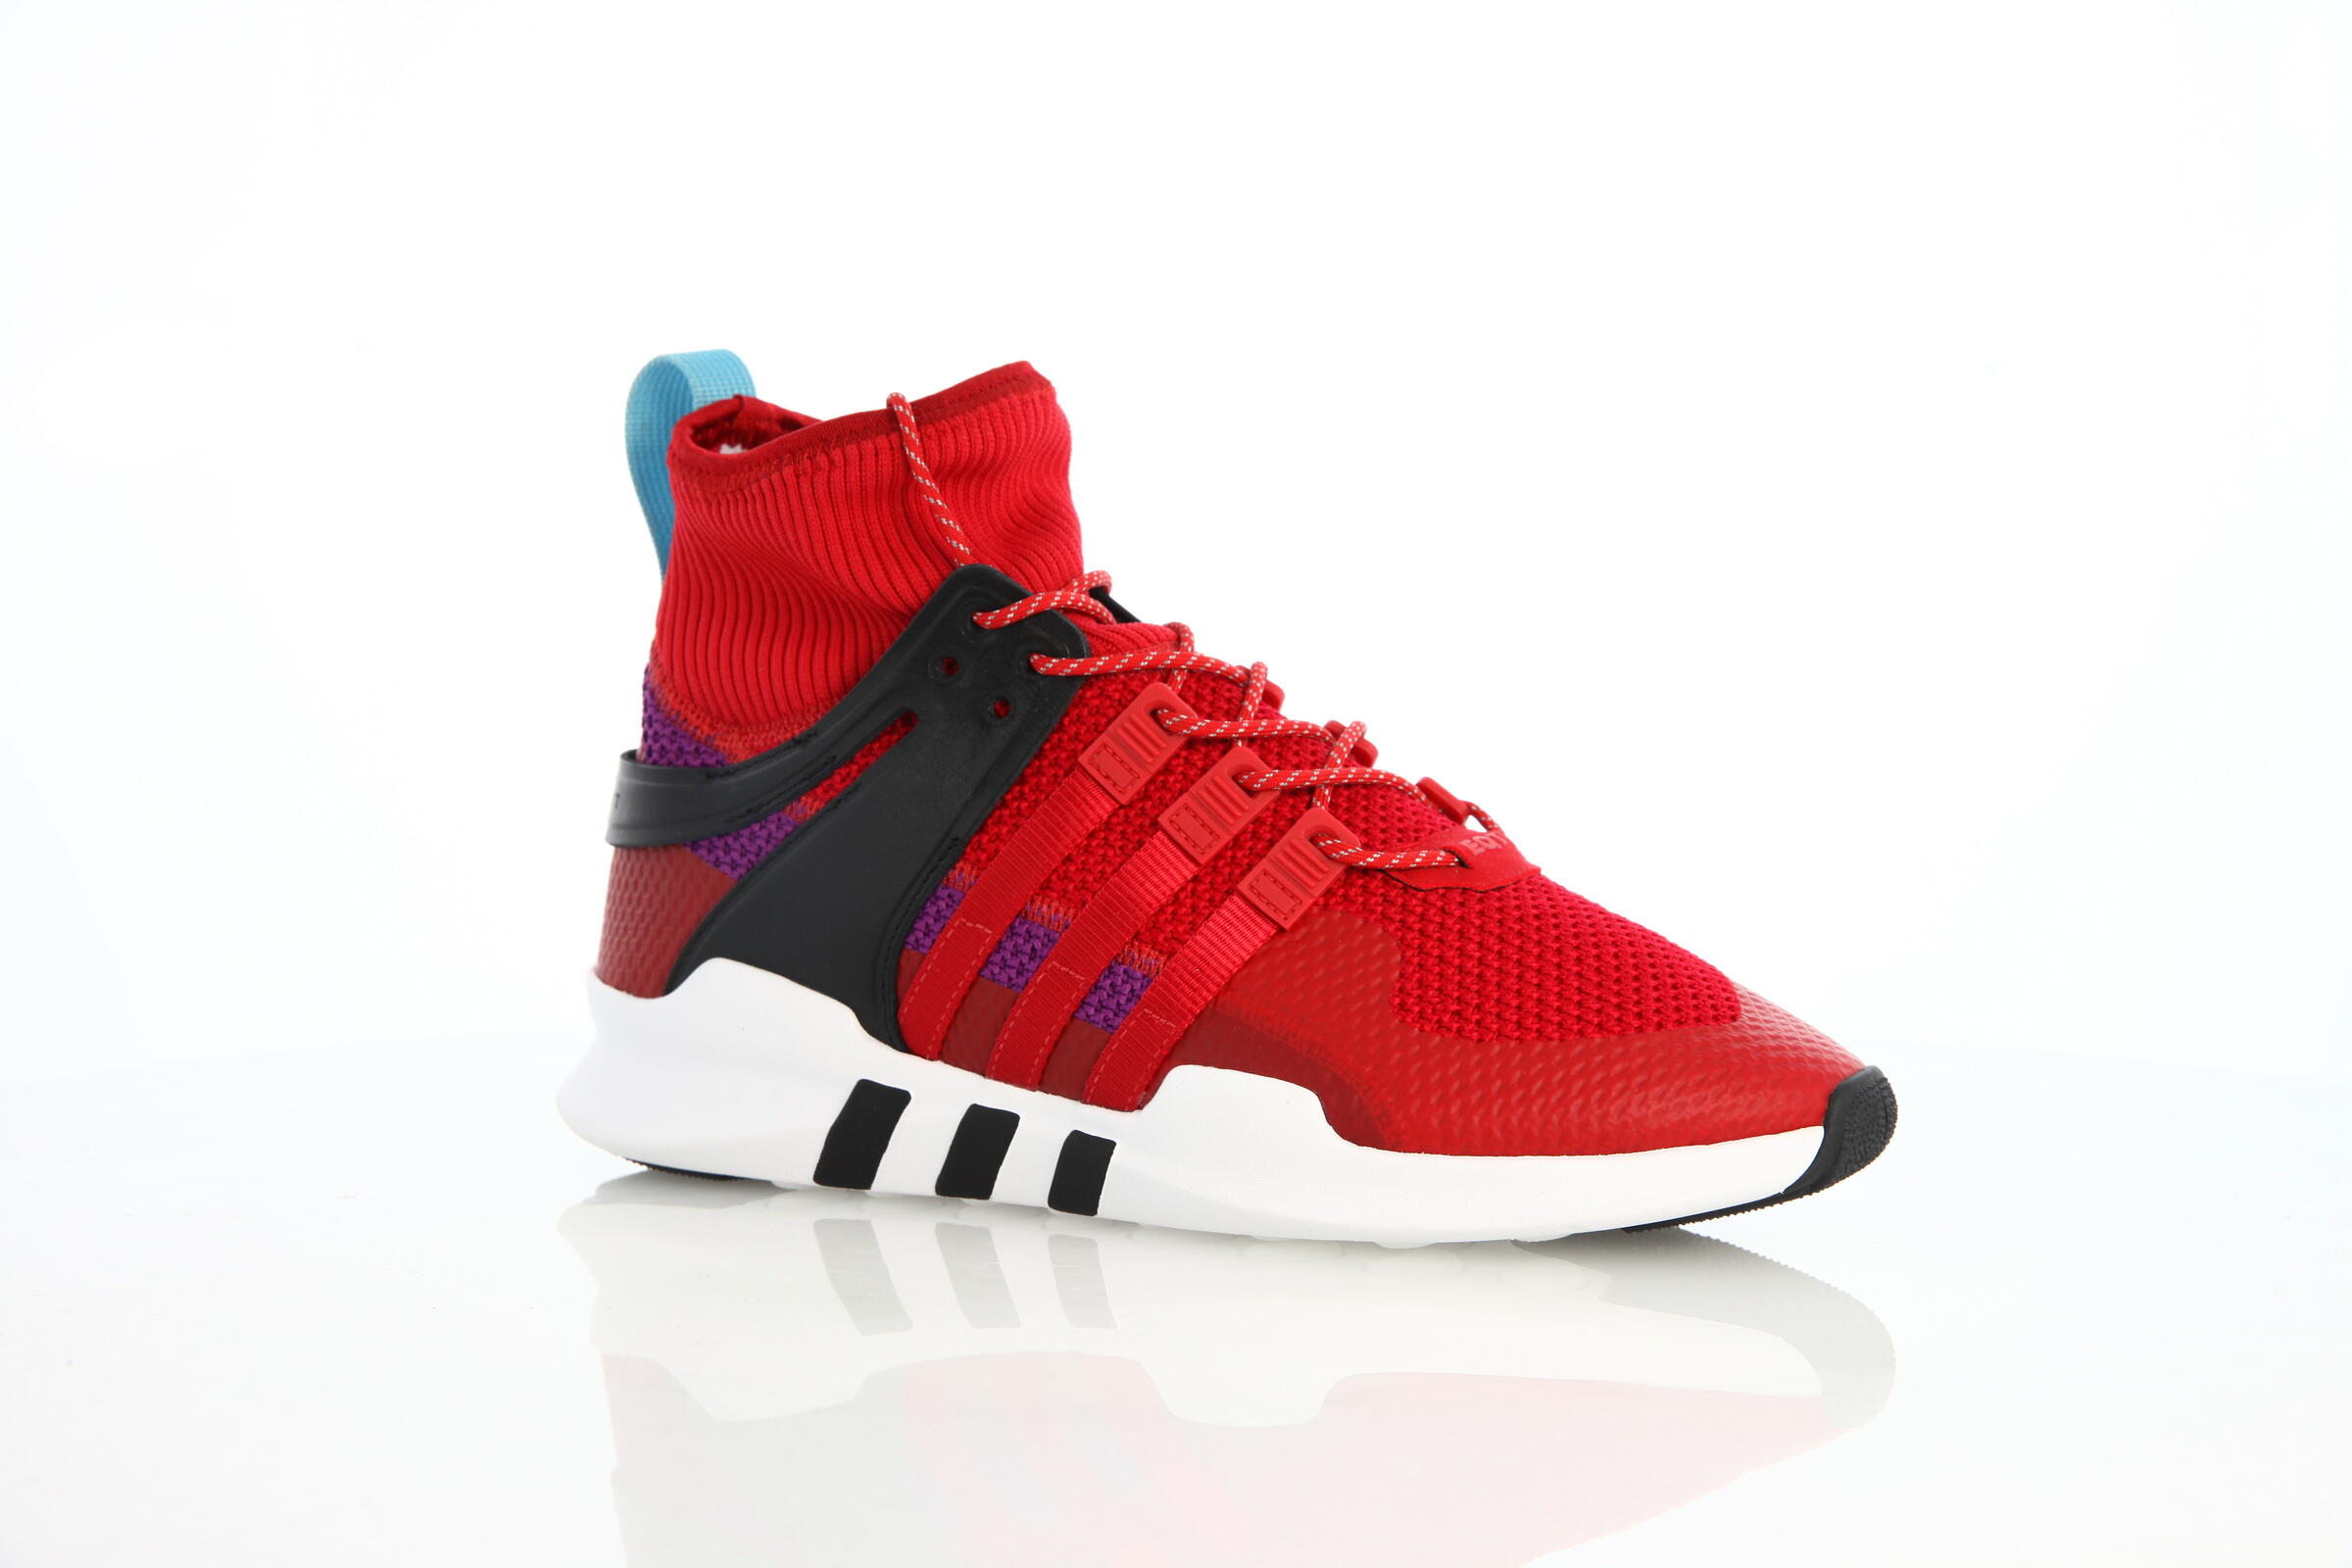 adidas Performance EQT Support Adventure Pack "Scarlet"